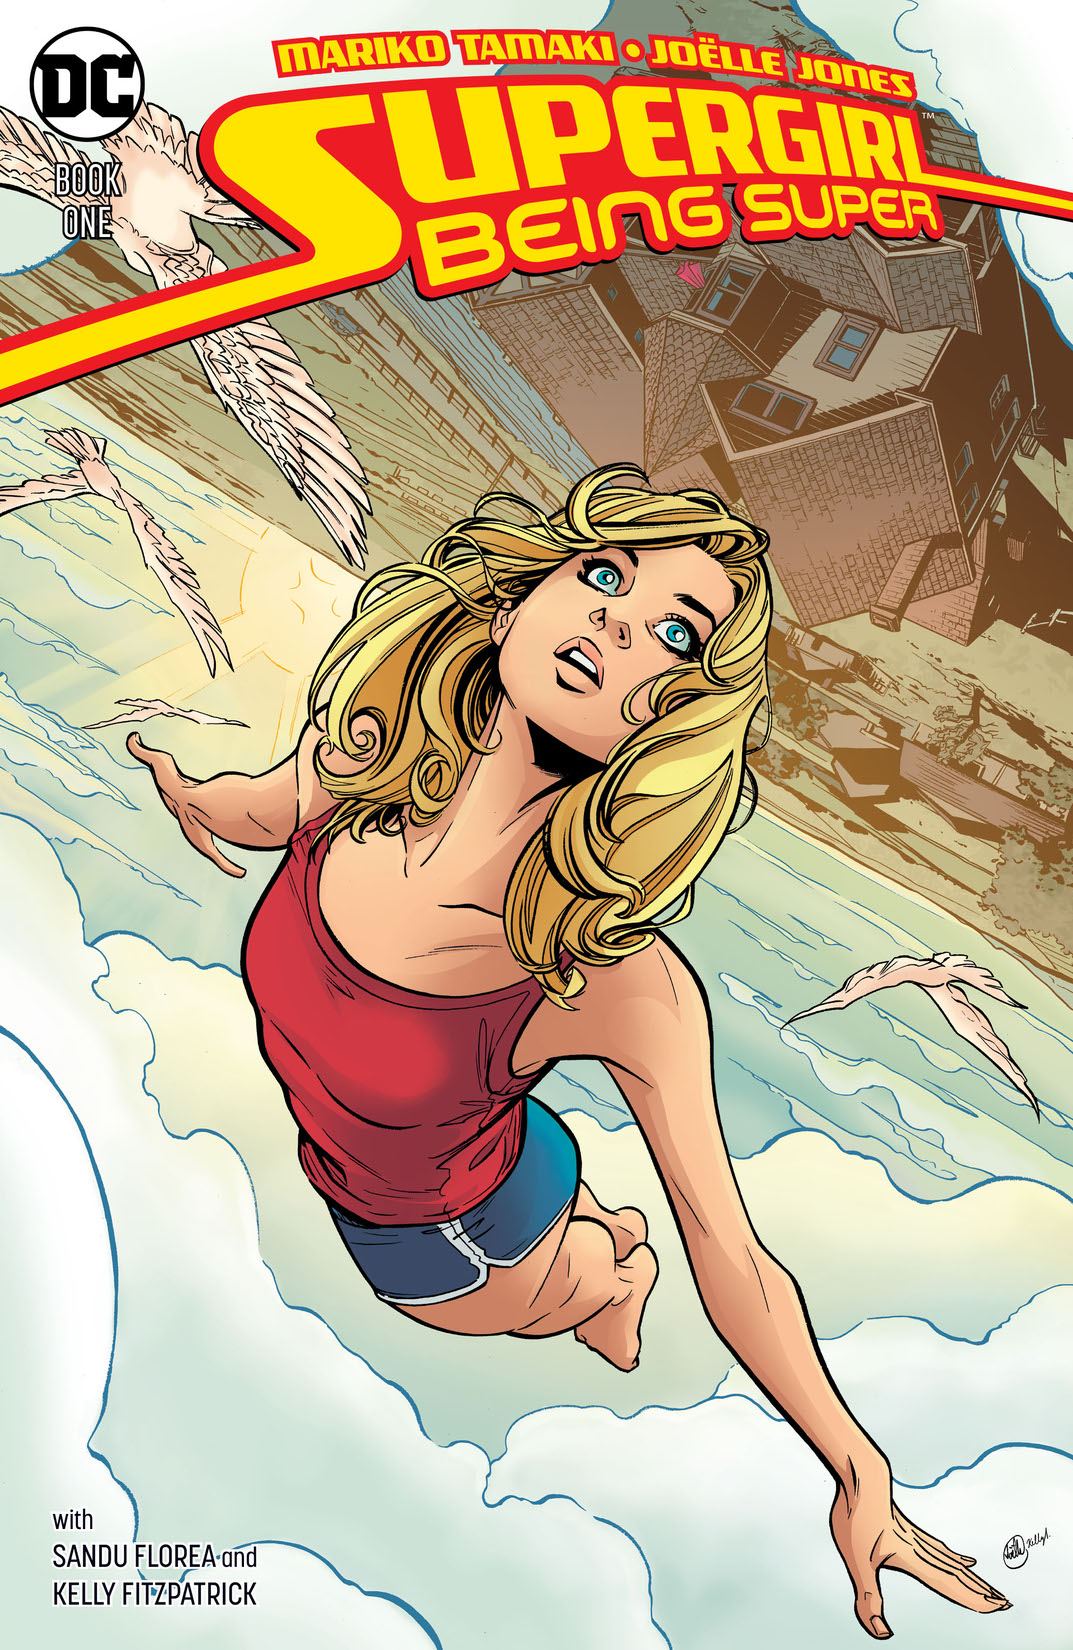 Supergirl: Being Super #1 preview images